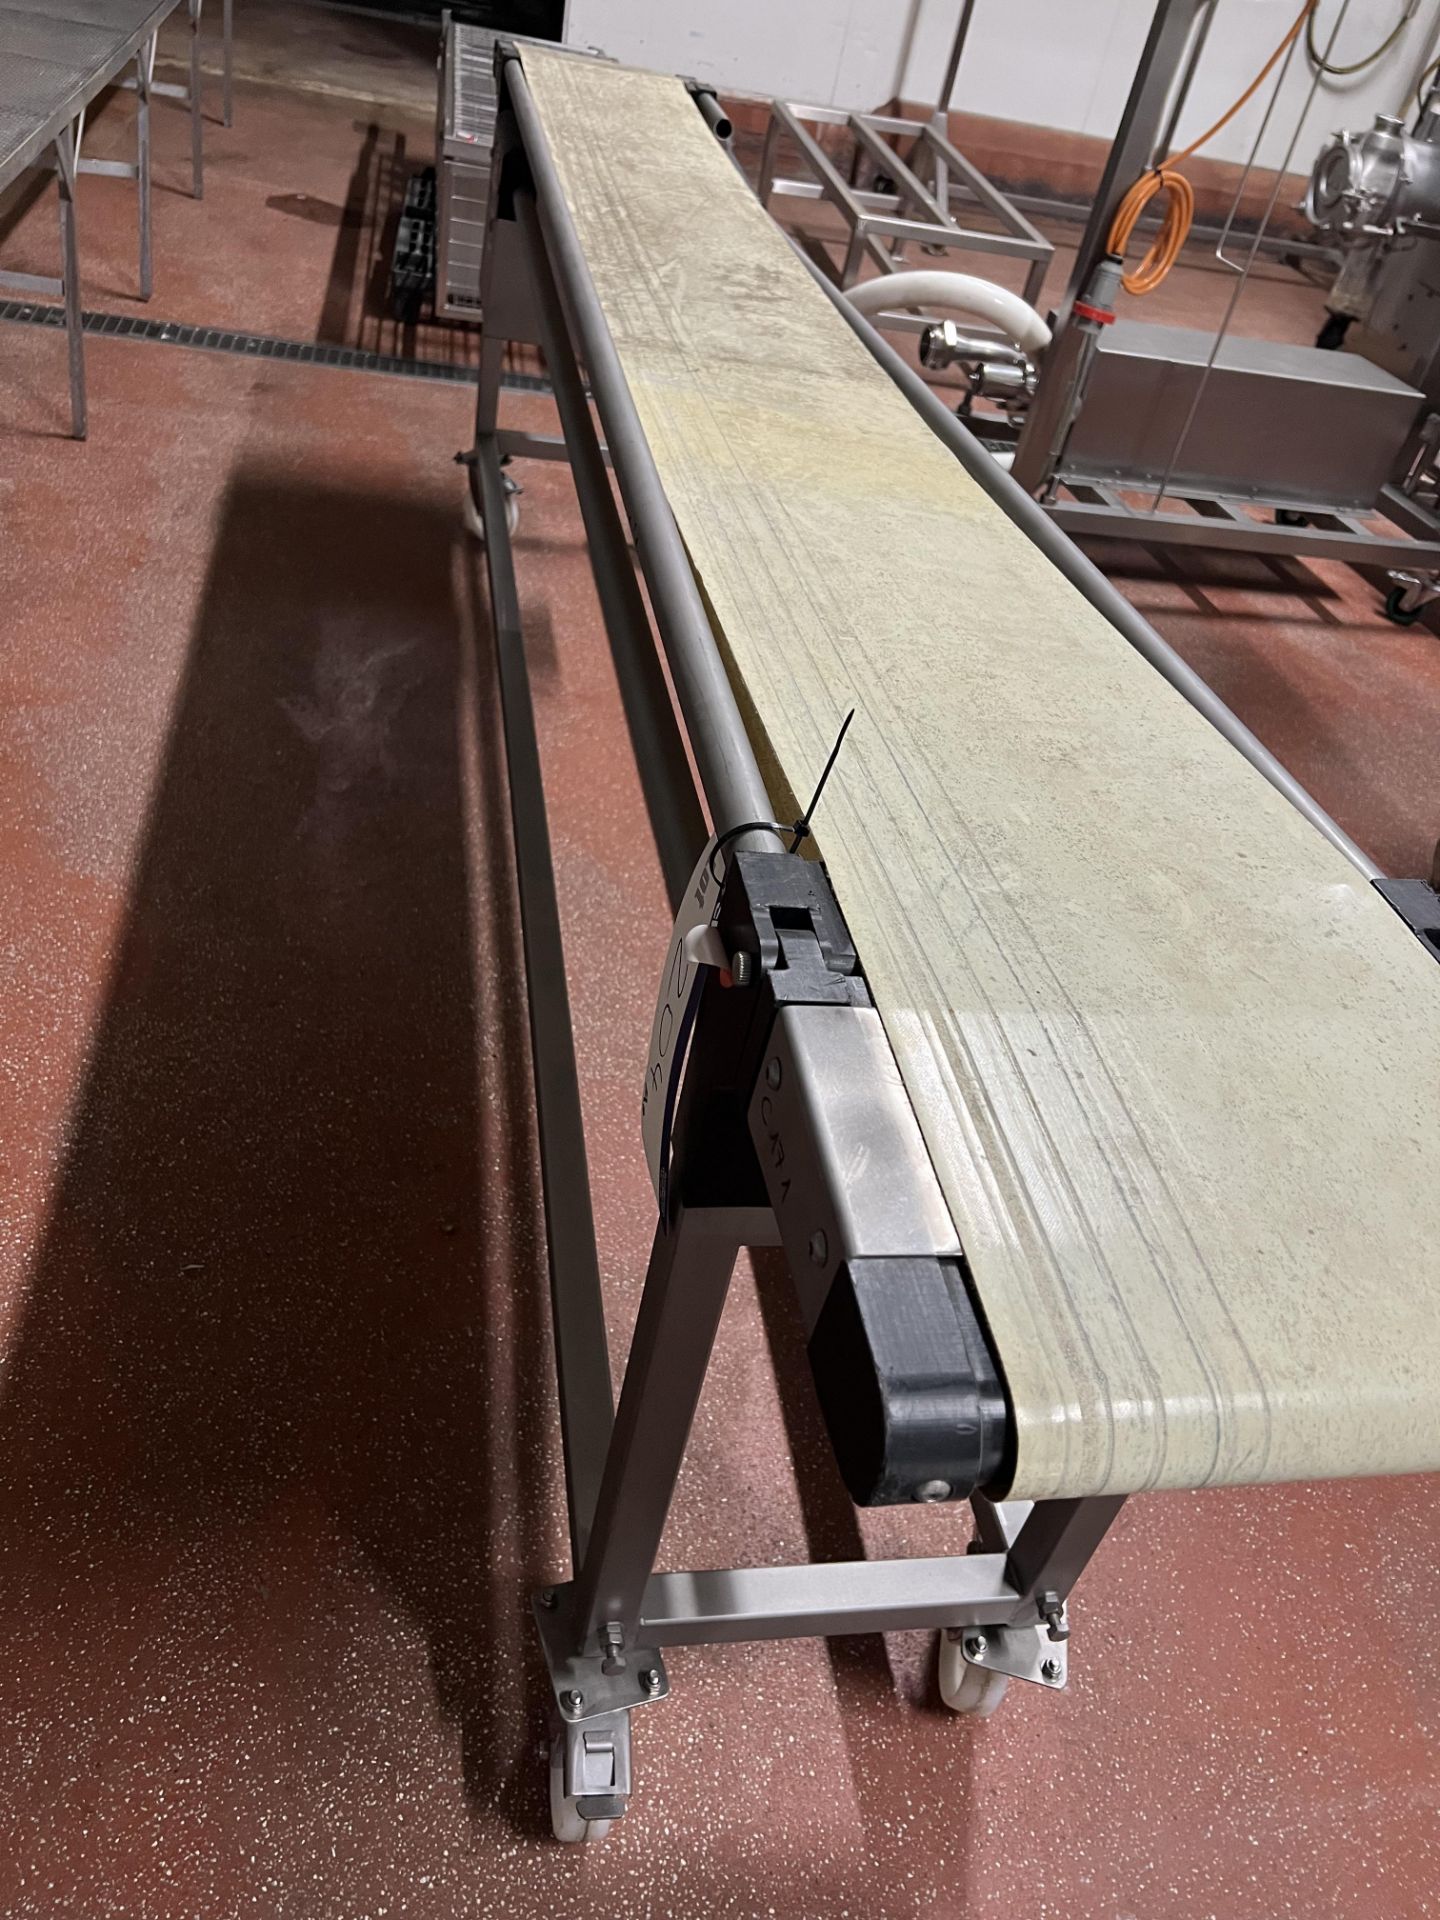 Cheetah/ Syspal Mobile Conveyor, approx. 3m x 0.3m x 0.9m high, lift out charge - £30 + VAT, lot